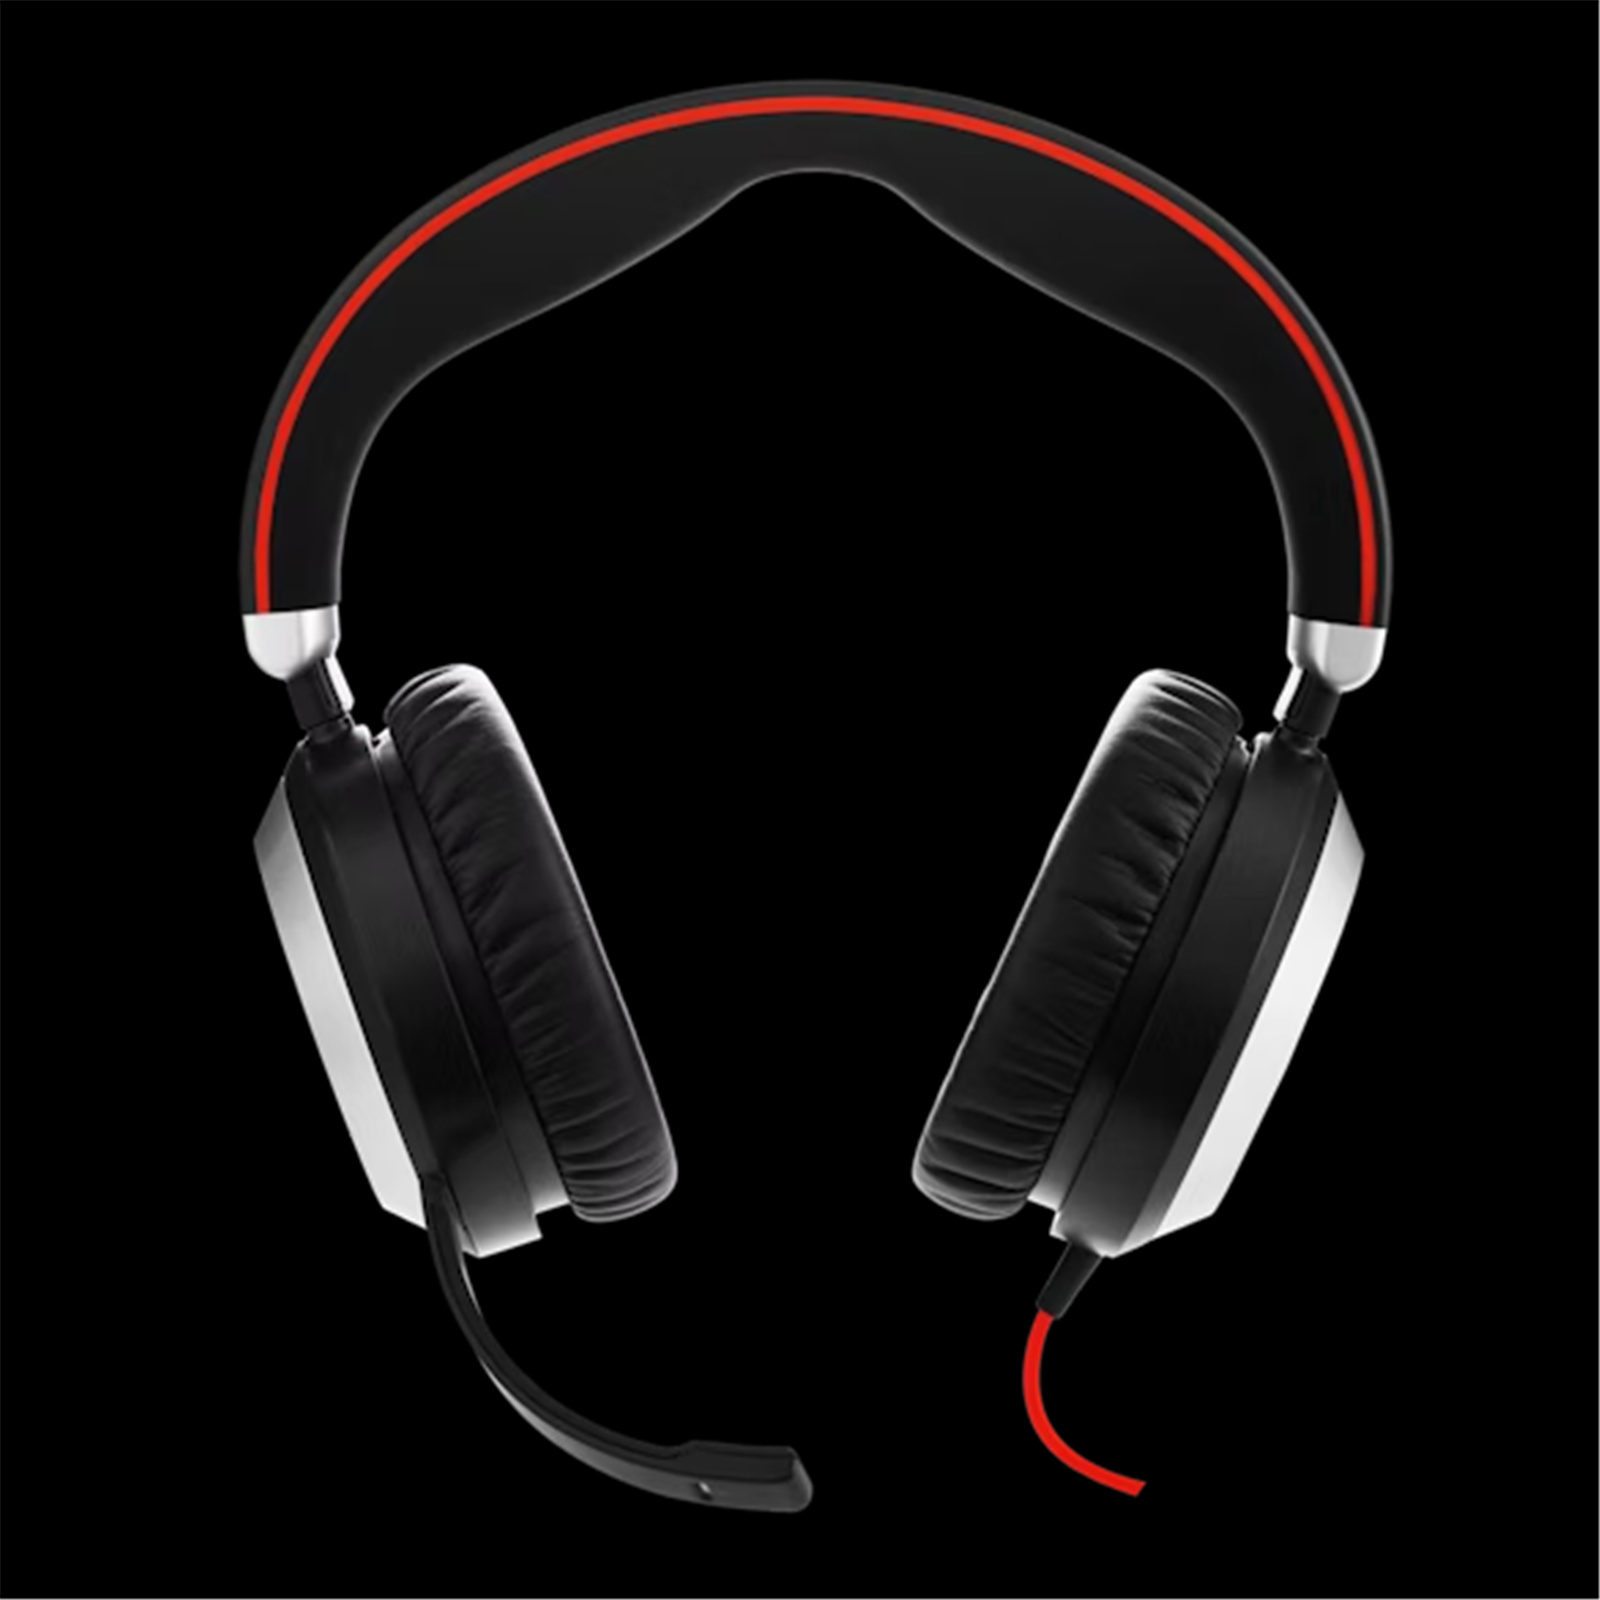 Buy the Jabra Enterprise 7899-829-209 EVOLVE 80 UC Stereo USB Wired Headset...  ( 7899-829-209 ) online - PBTech.com/pacific